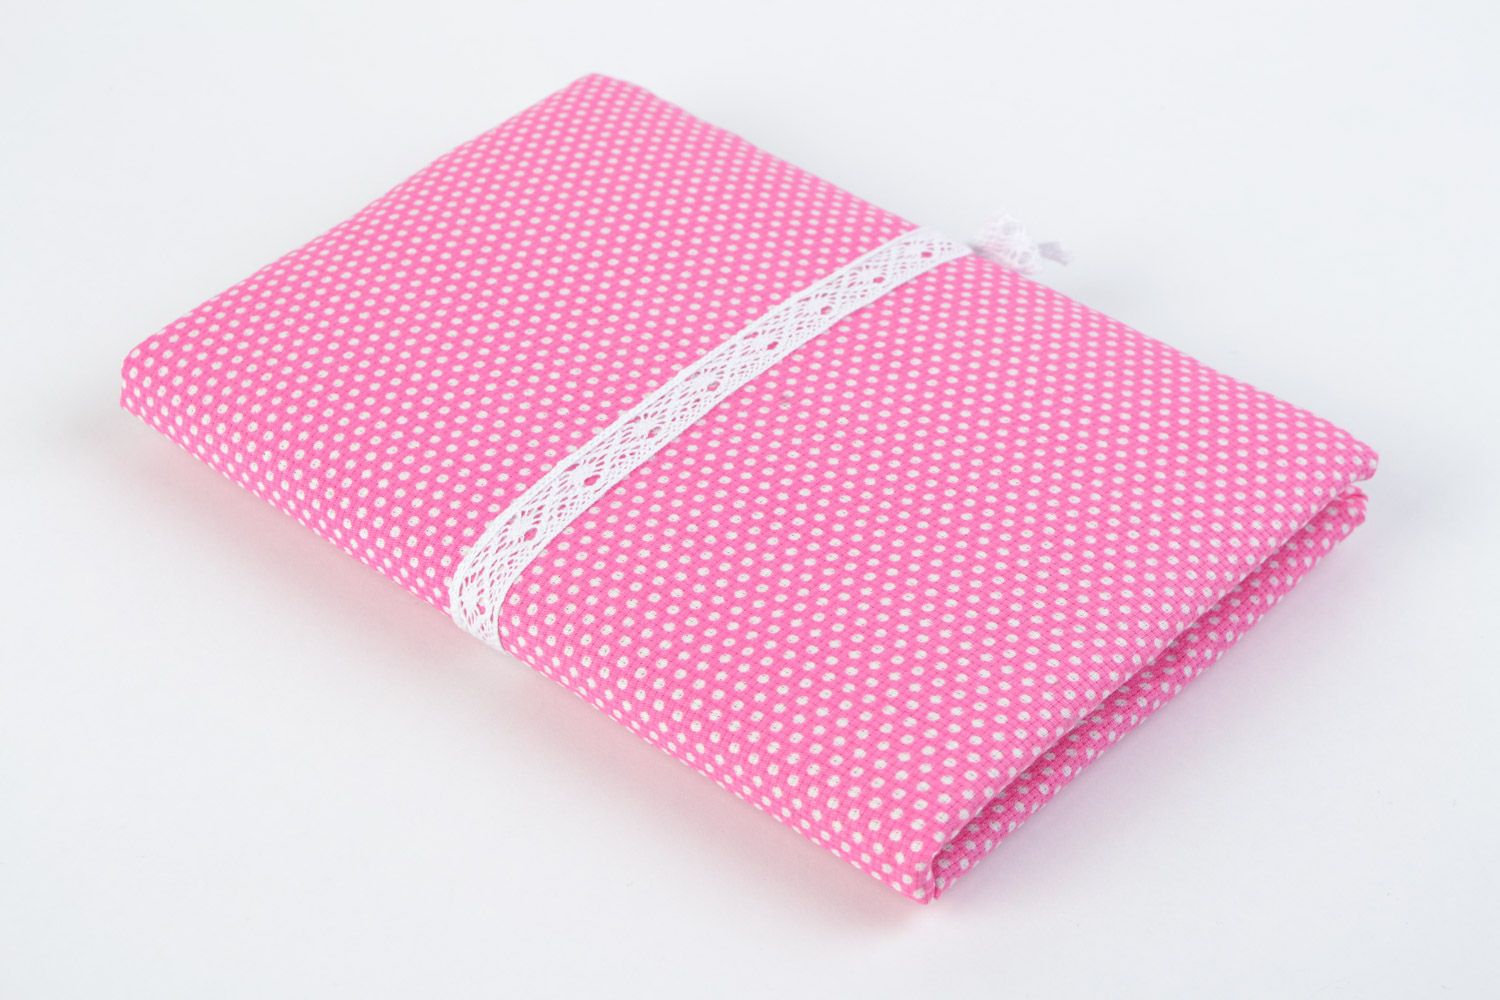 Handmade notebook with bright pink and white polka dot cotton cover for 60 pages photo 5